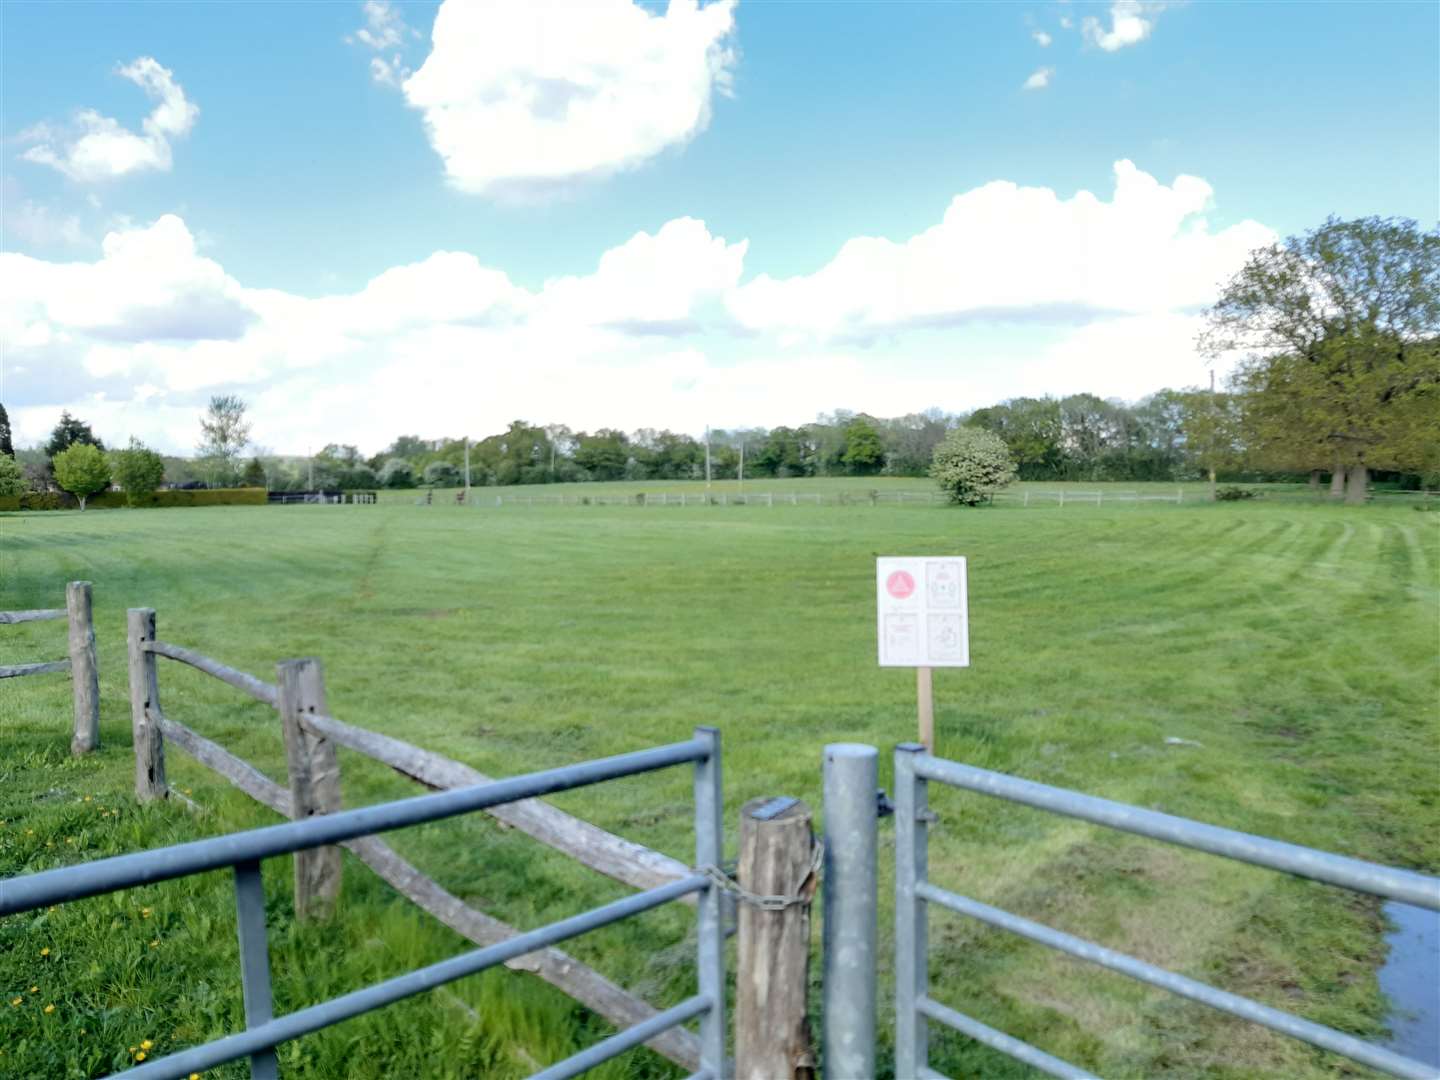 The site of the proposed holiday park off Satilebridge Lane, Marden